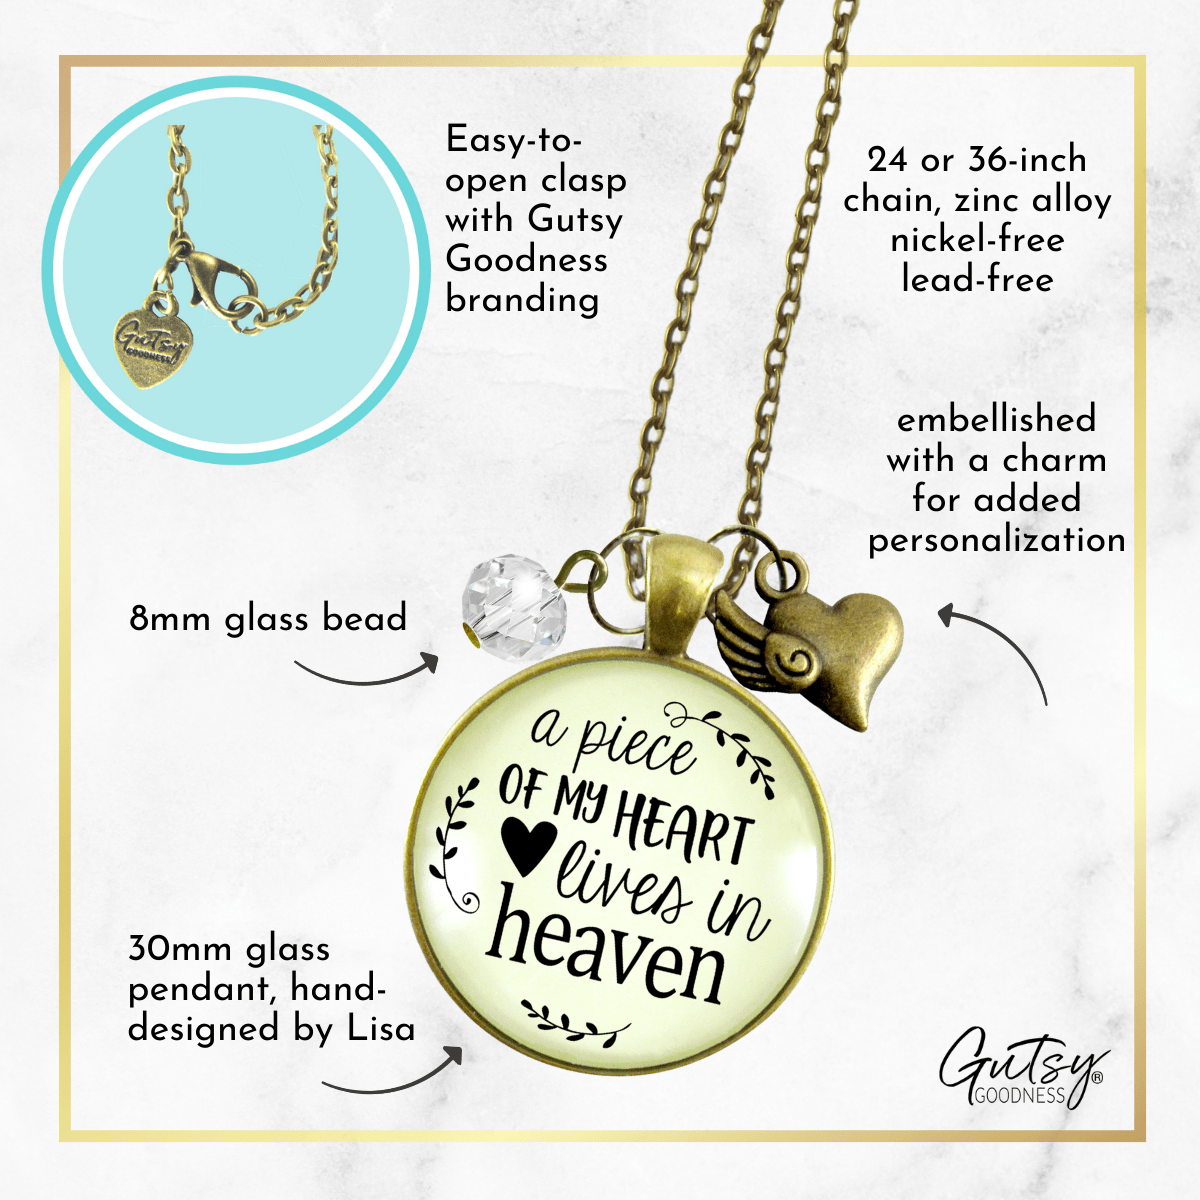 Gutsy Goodness Memorial Necklace Piece of My Heart Lives Heaven Remembrance Jewelry - Gutsy Goodness;Memorial Necklace Piece Of My Heart Lives Heaven Remembrance Jewelry - Gutsy Goodness Handmade Jewelry Gifts